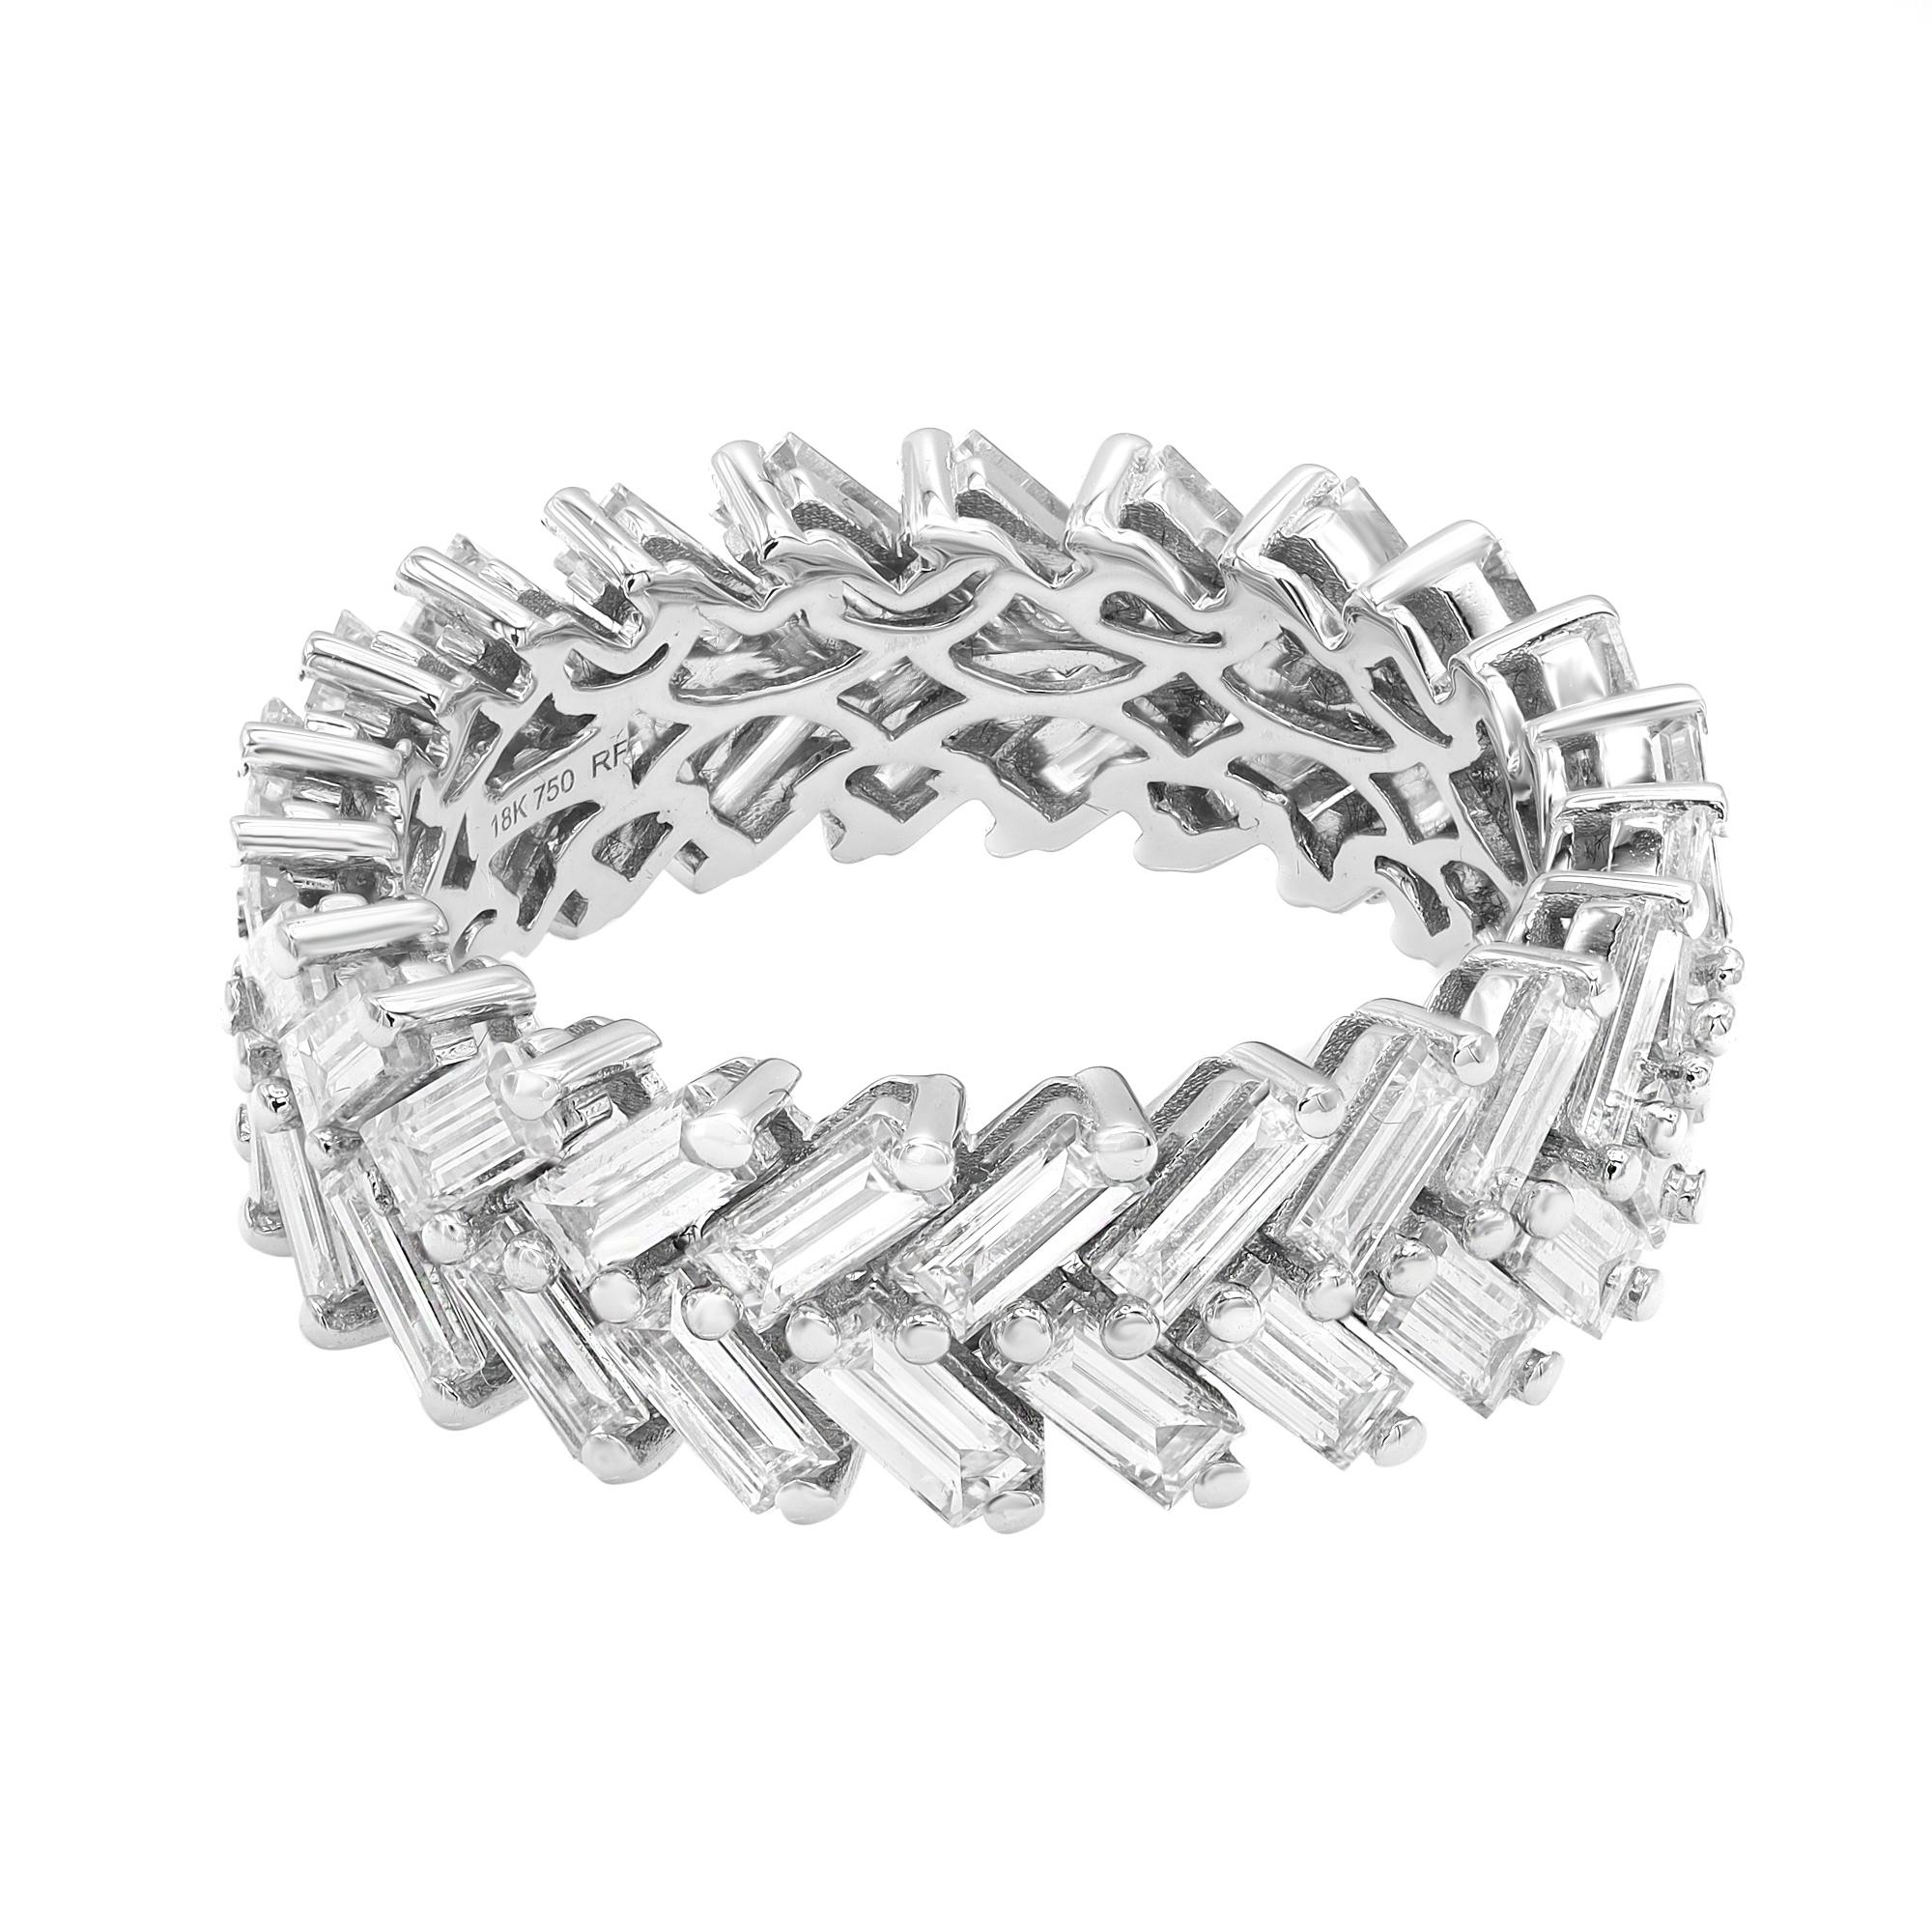 This beautiful diamond eternity ring band features prong set double row of baguette cut sparkling diamonds. Crafted in 18k white gold band. Total diamond weight: 3.62 carats. Diamond quality: color G-H and clarity VS-SI. Band width: 6.6mm. Total